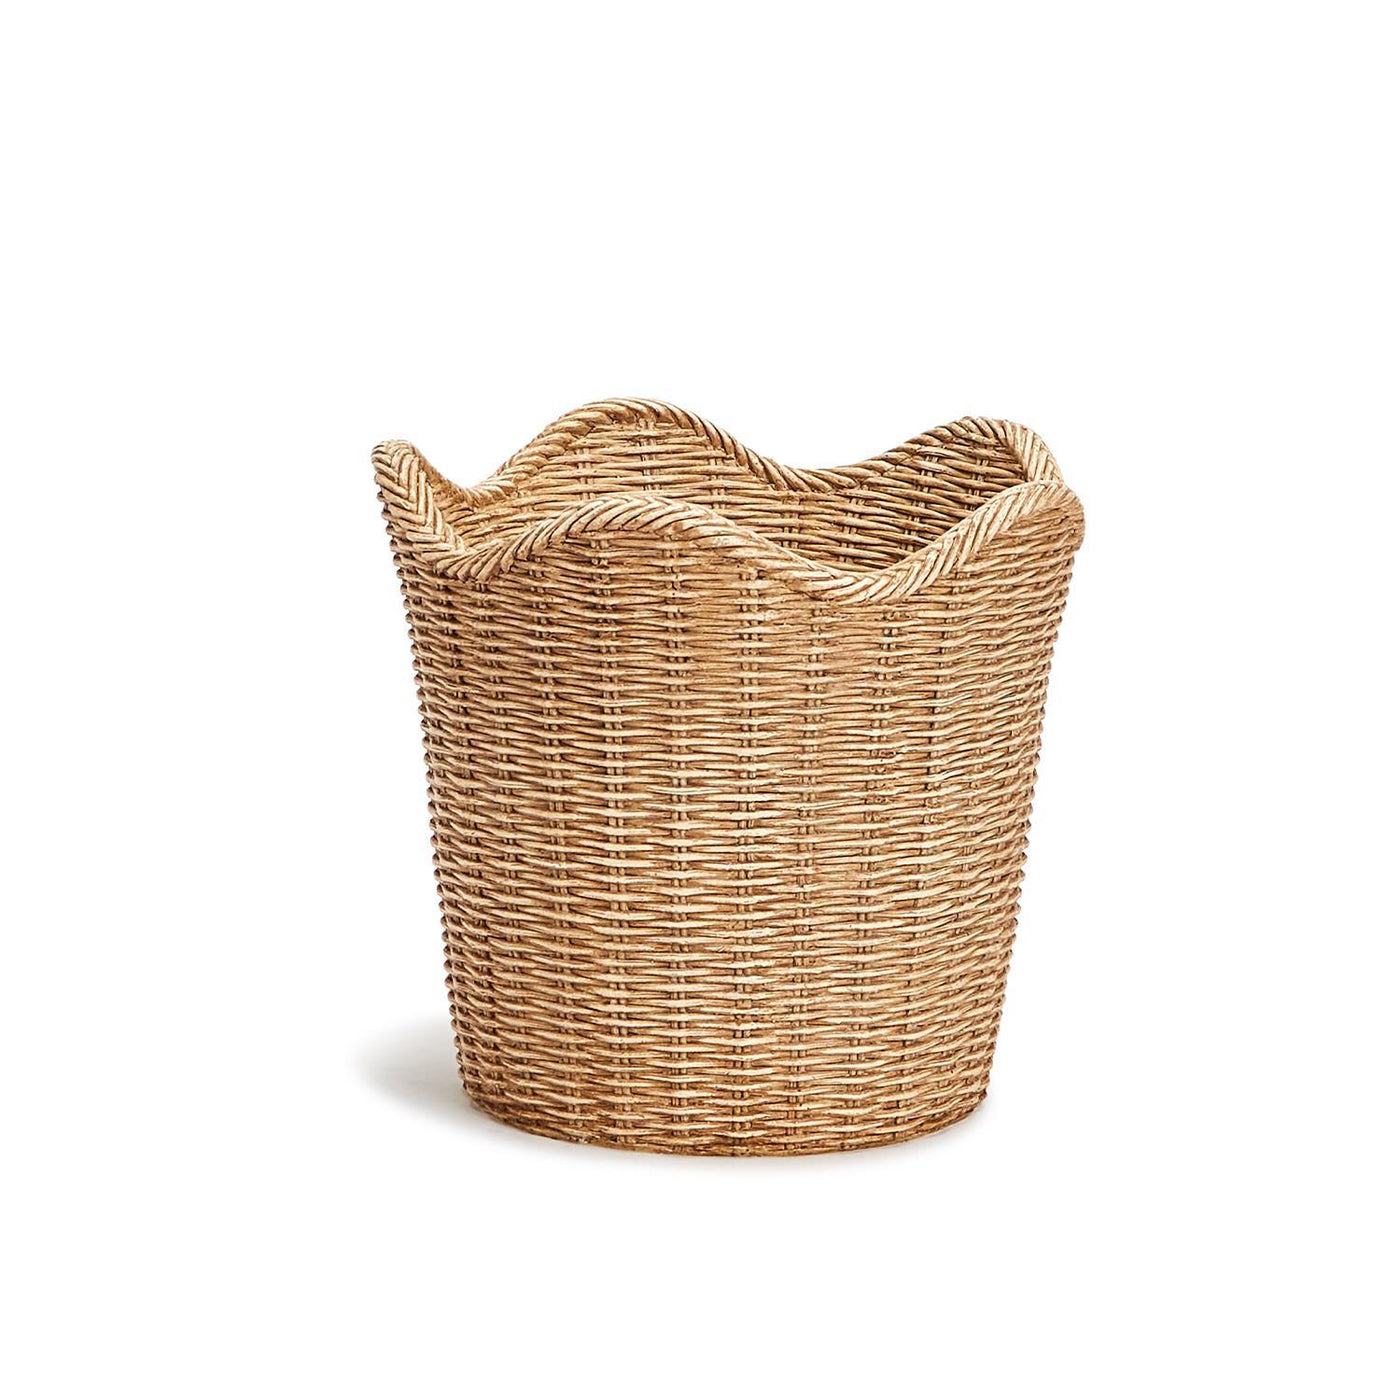 Basket Weave Pattern With Scalloped Edge Cachepot-Home/Giftware-Kevin's Fine Outdoor Gear & Apparel